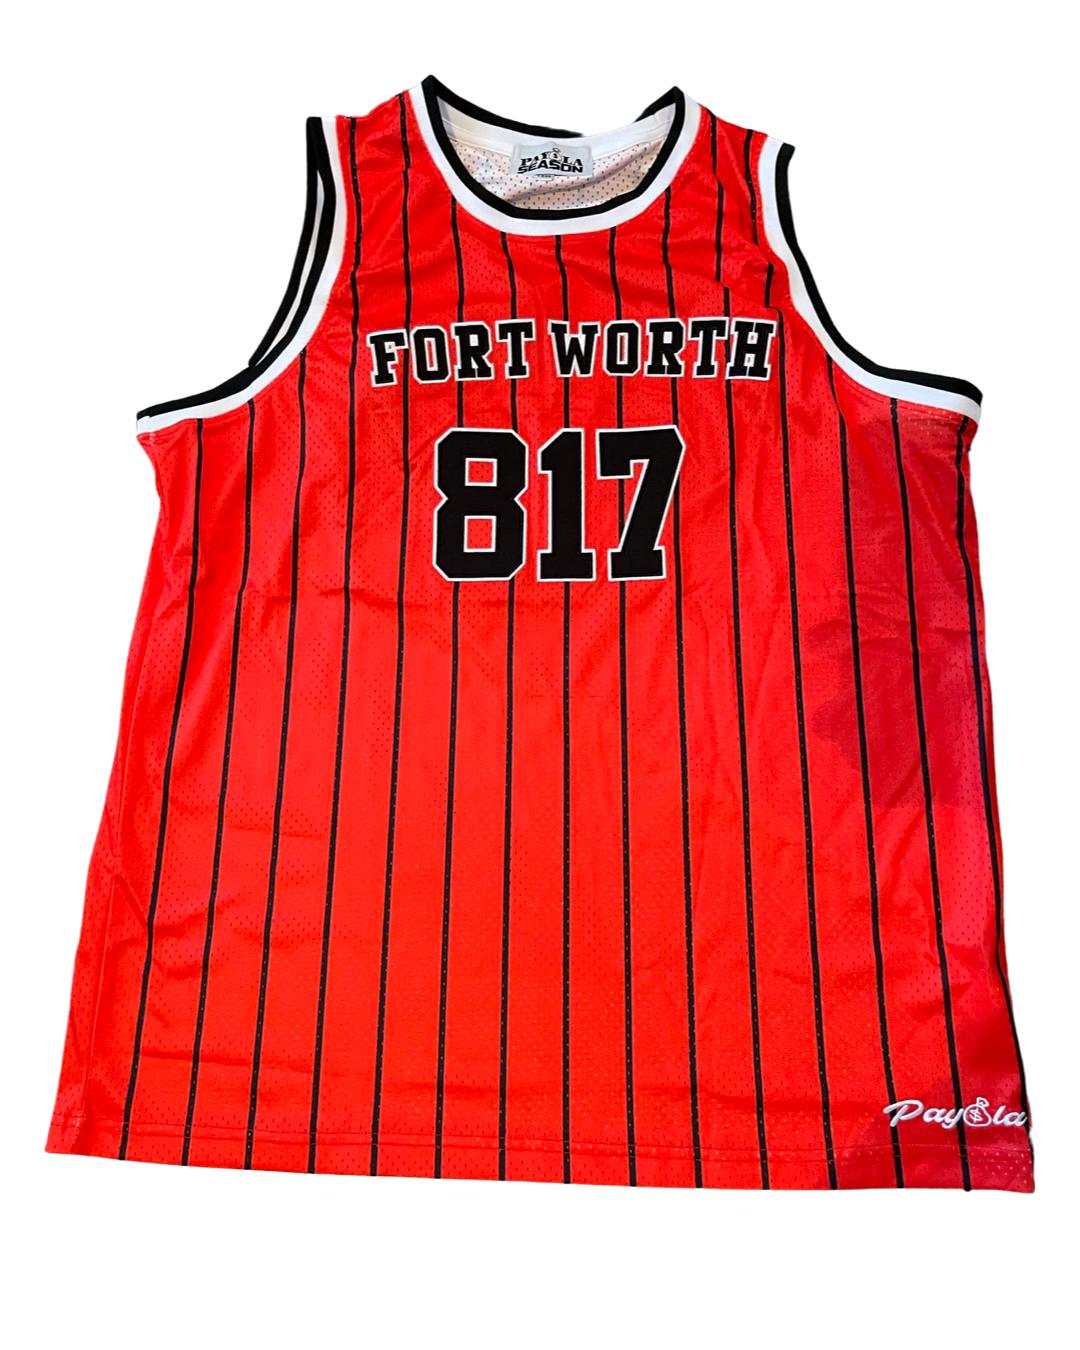 Fort Worth 817 Jersey (Red)